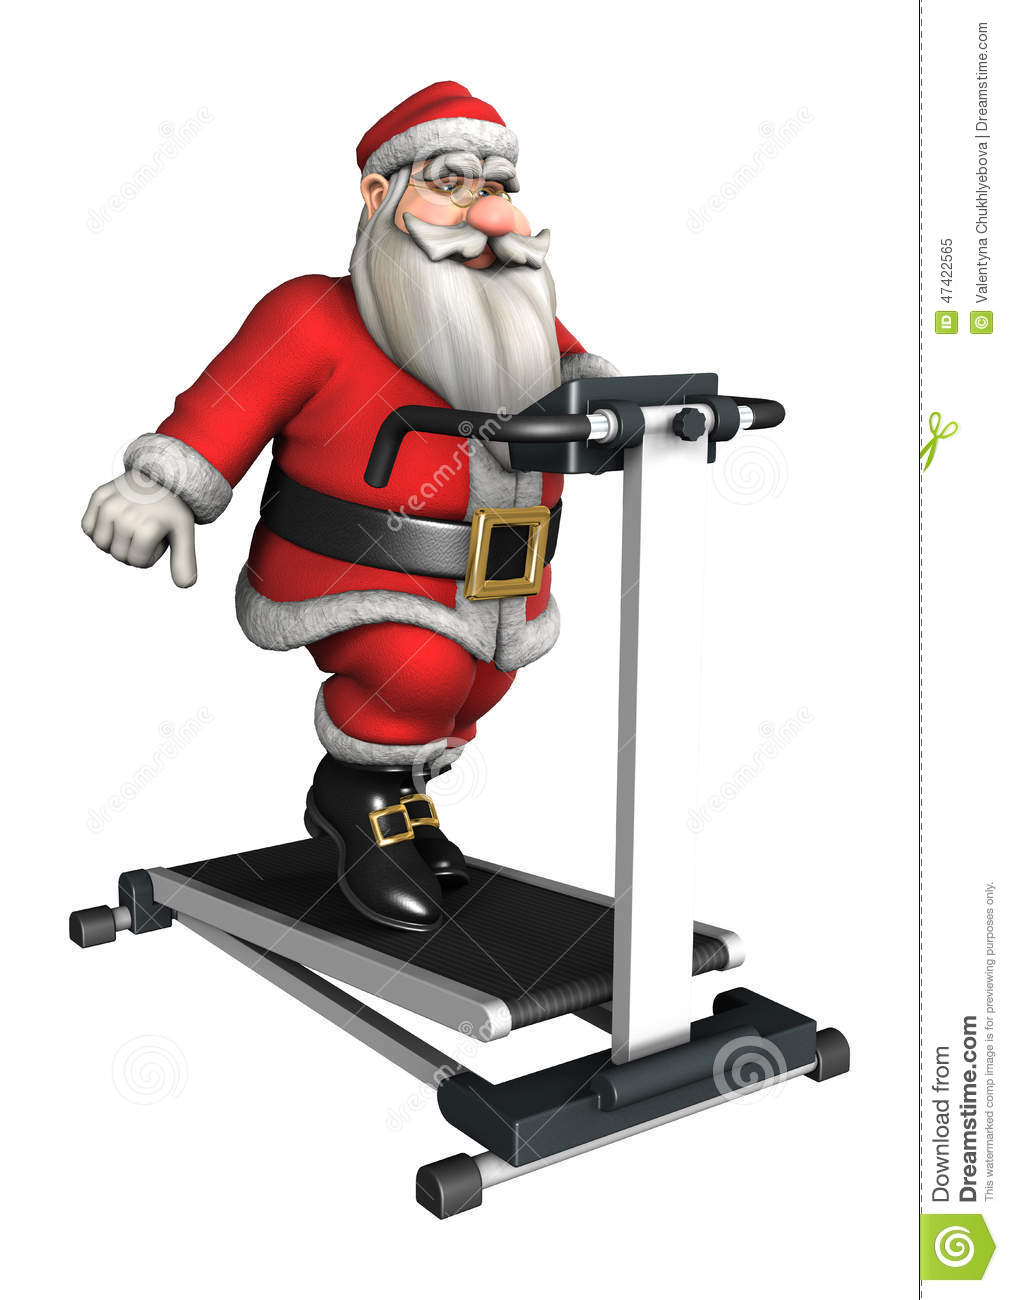 3d Digital Render Of A Santa Exercising On A Tread Mill Isolated On